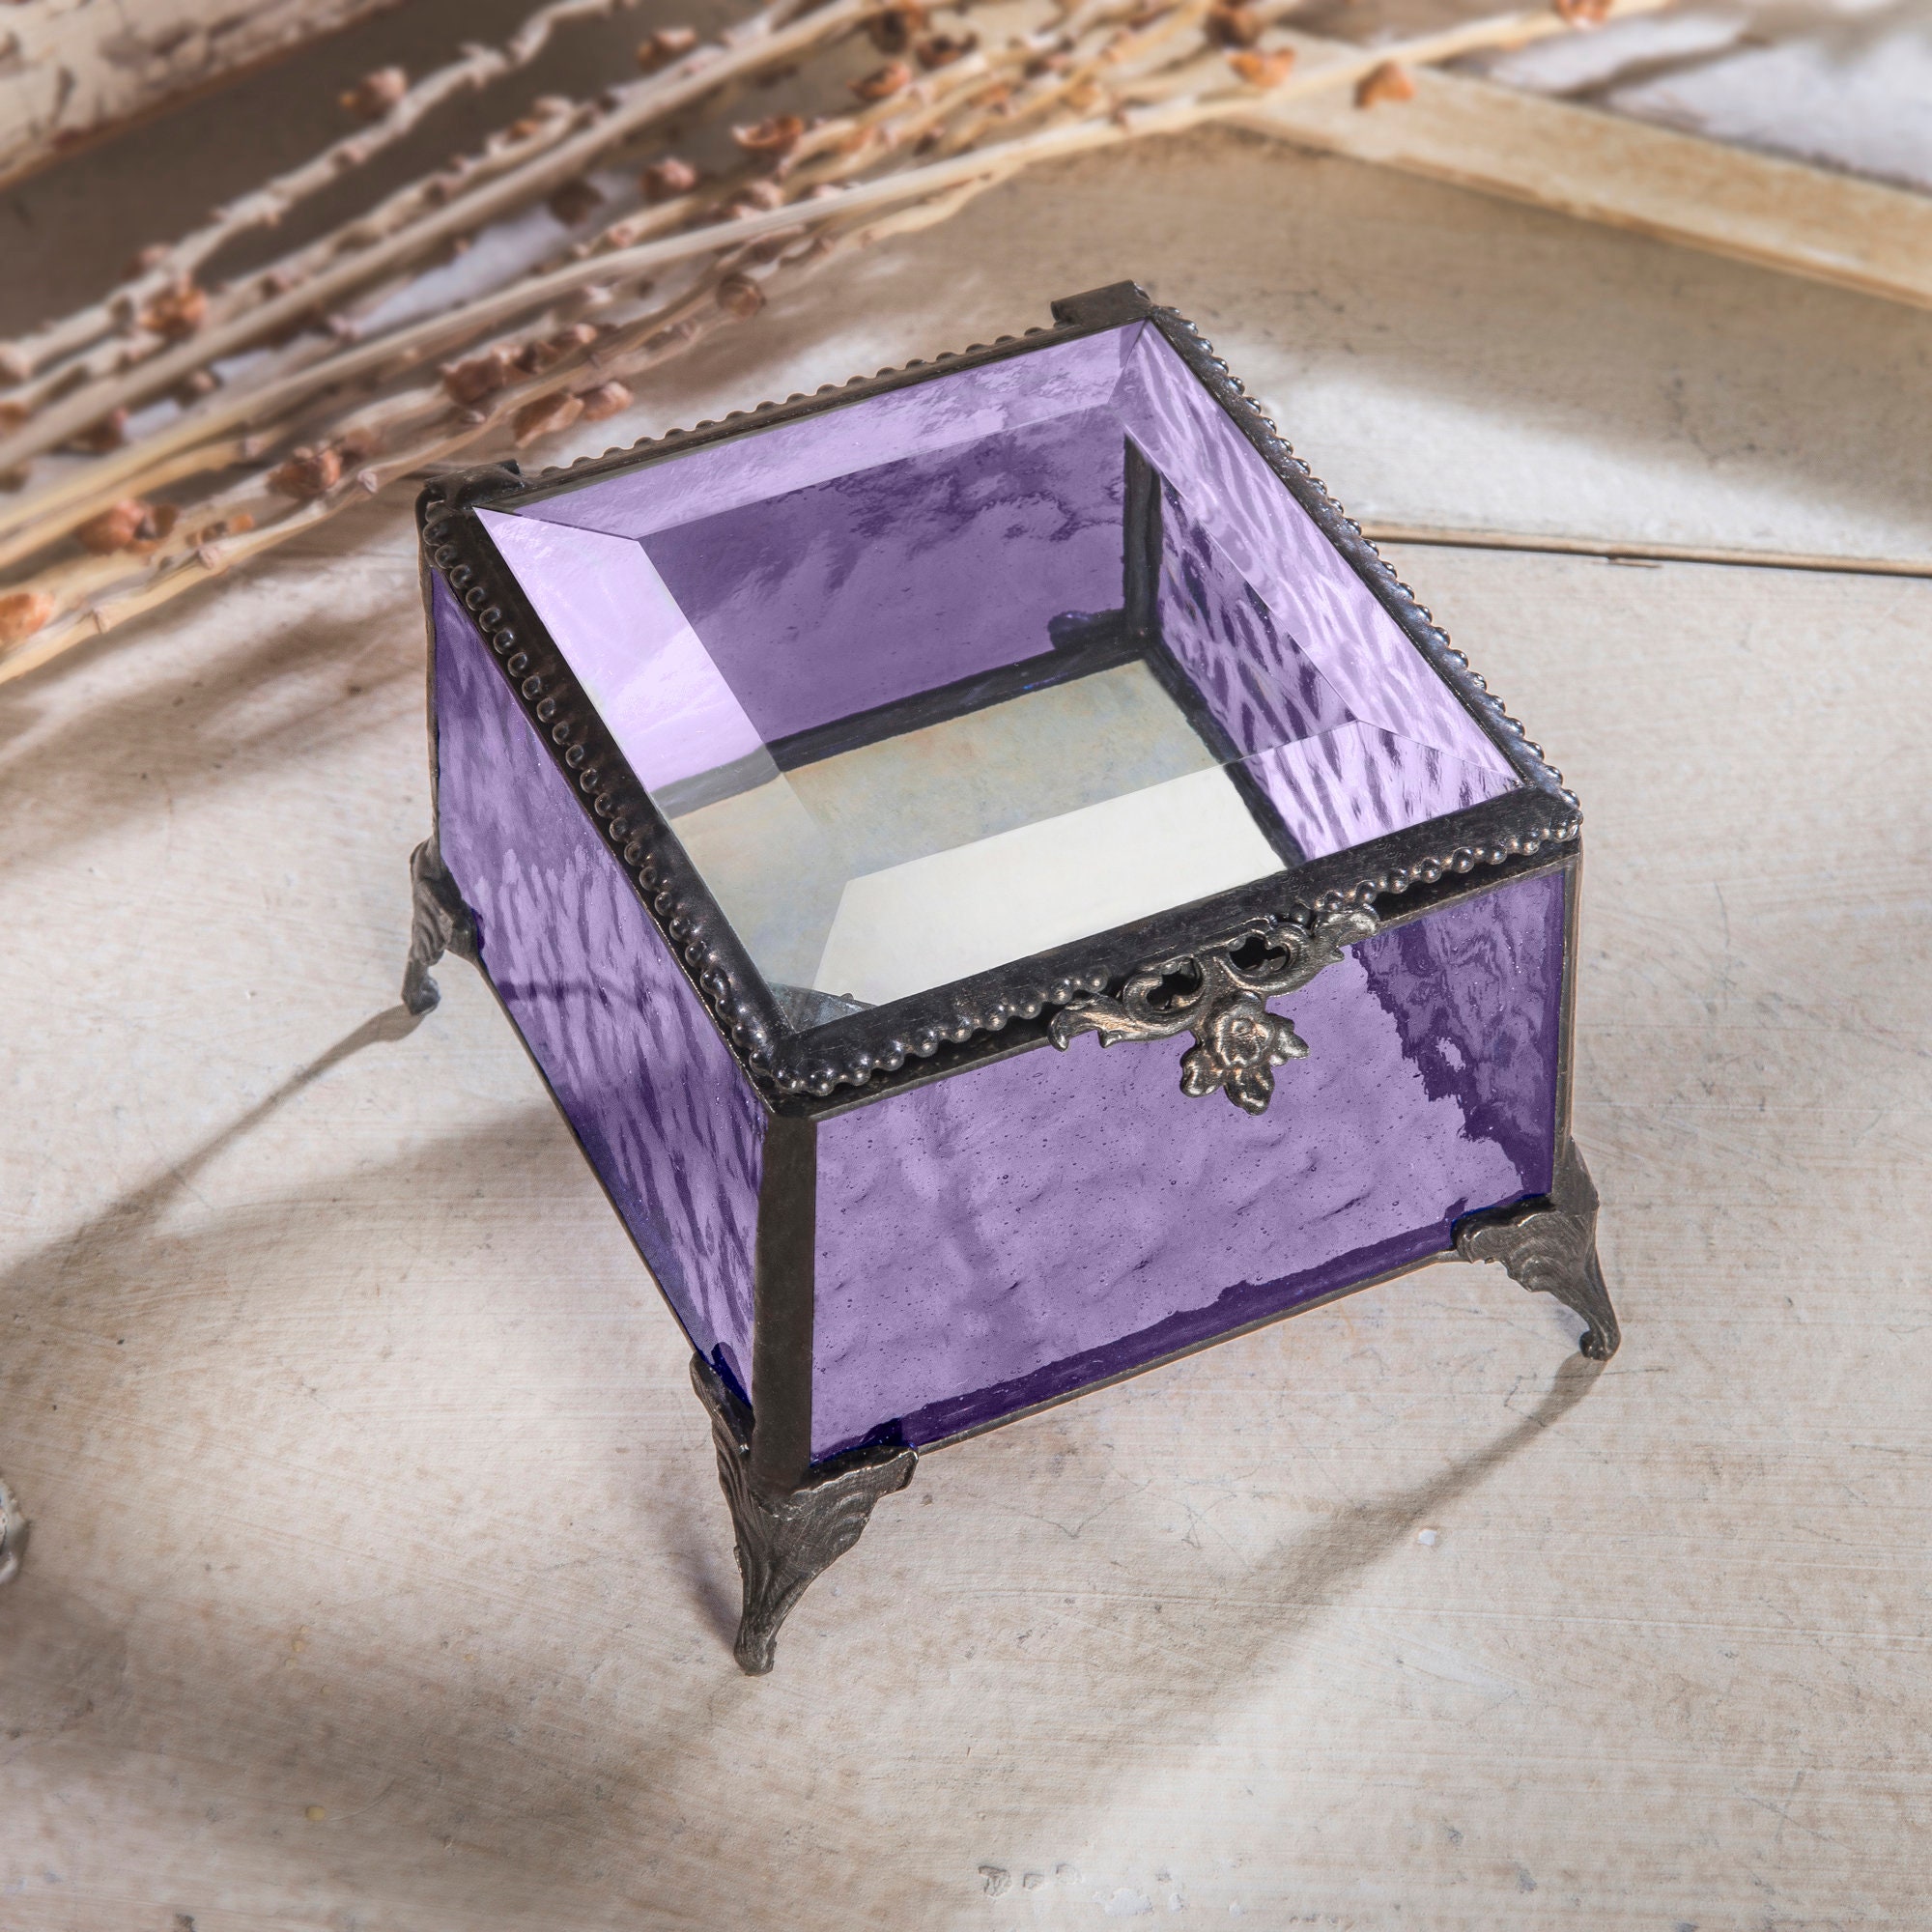 Details about   Fashionable LED Lighted Storage Box Jewelry Display Case Gift Purple 